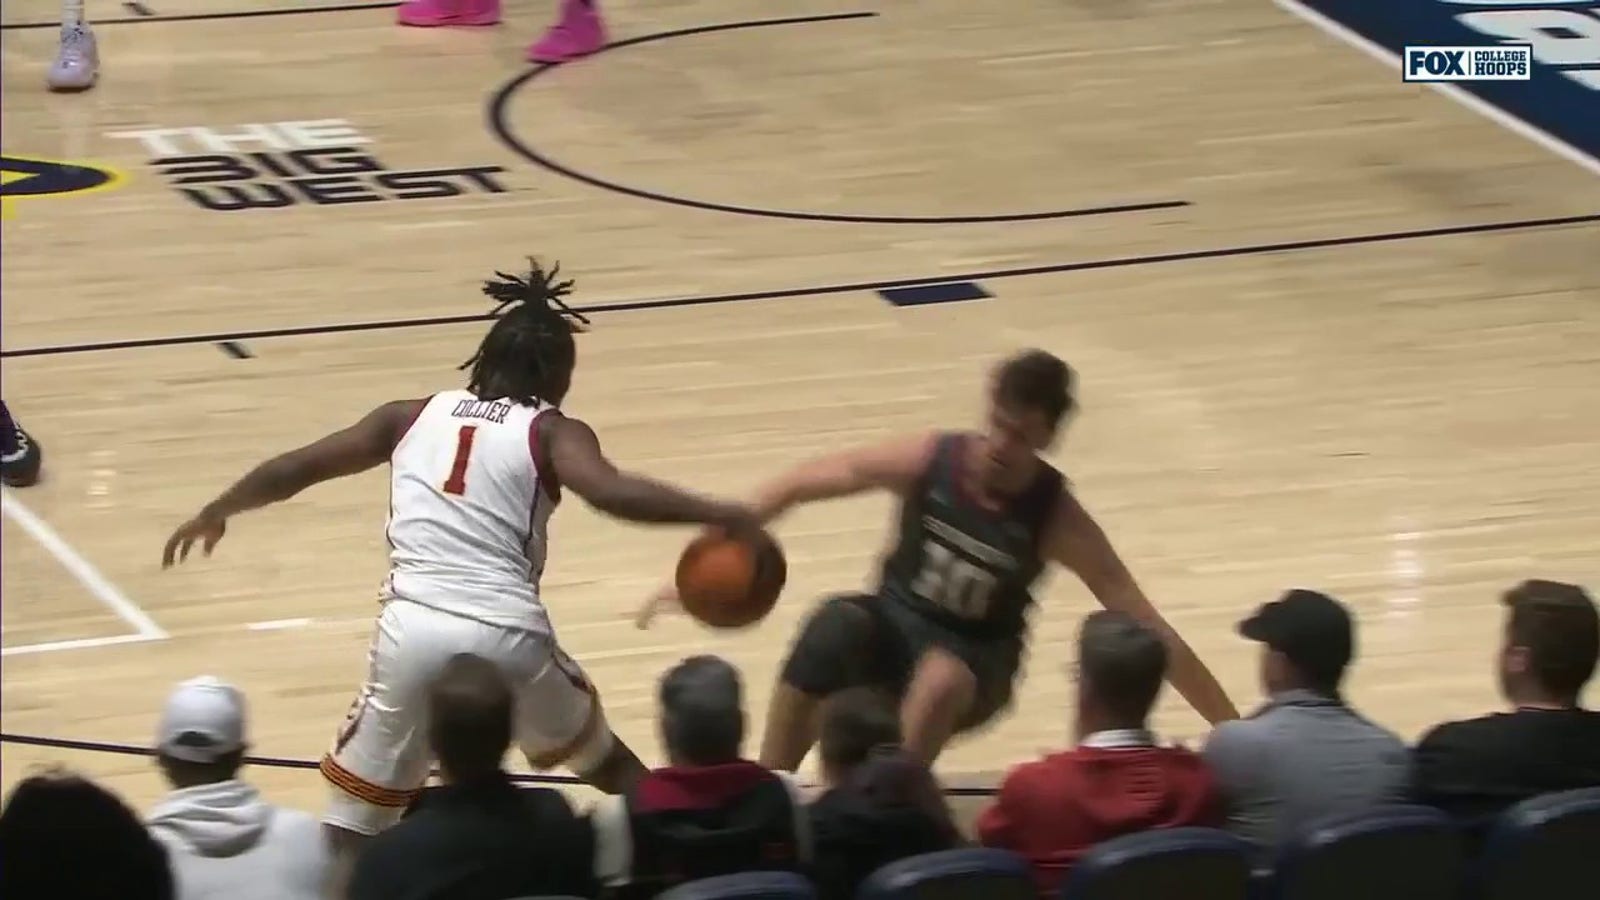 USC's Isaiah Collier breaks an Oklahoma defender's ankles and hits the 3-pointer